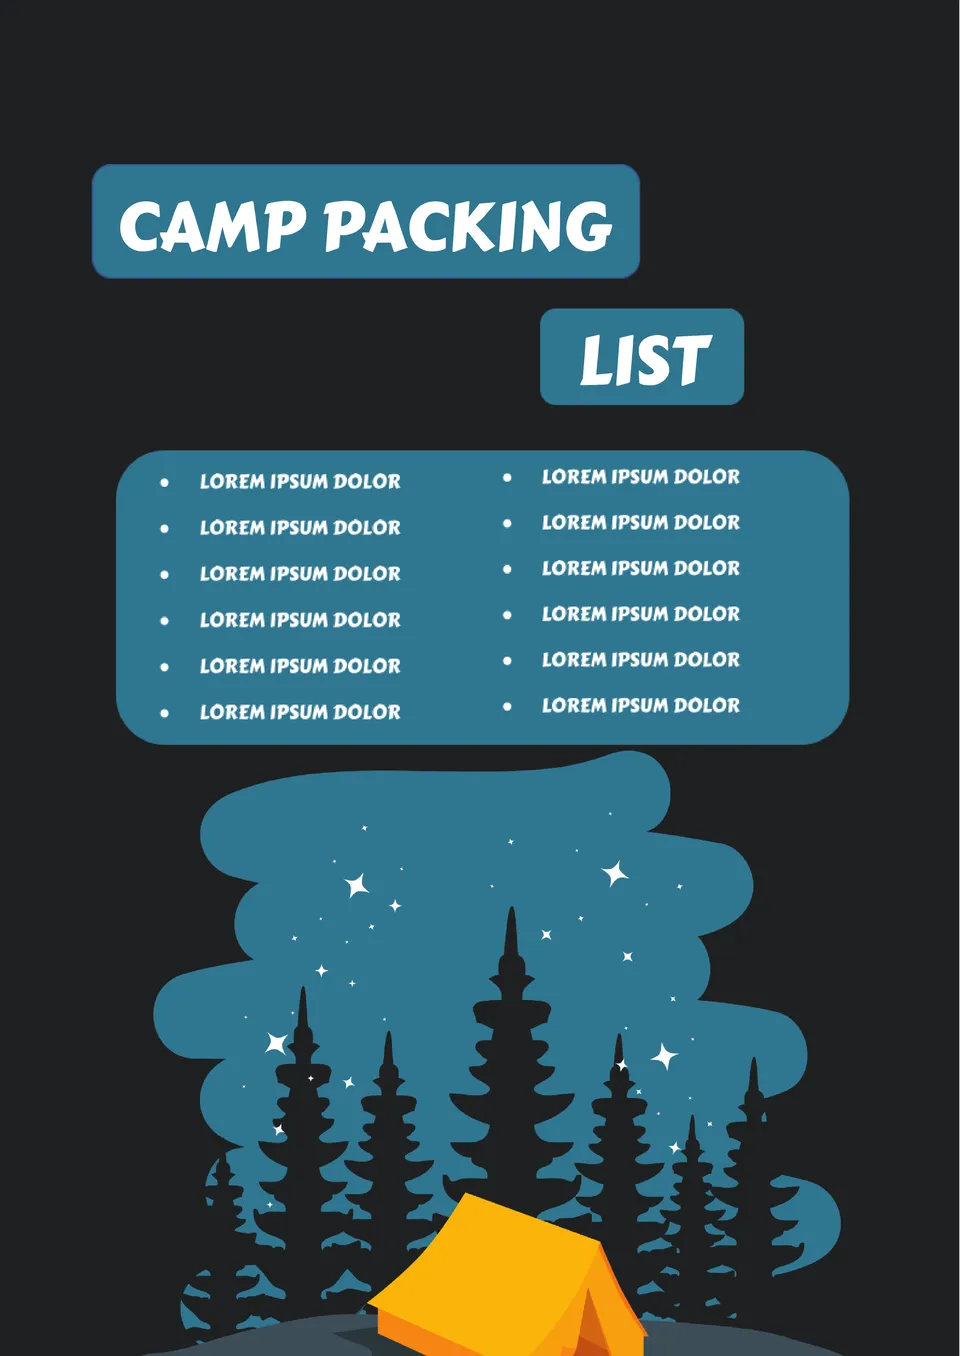 Camp Packing List Template